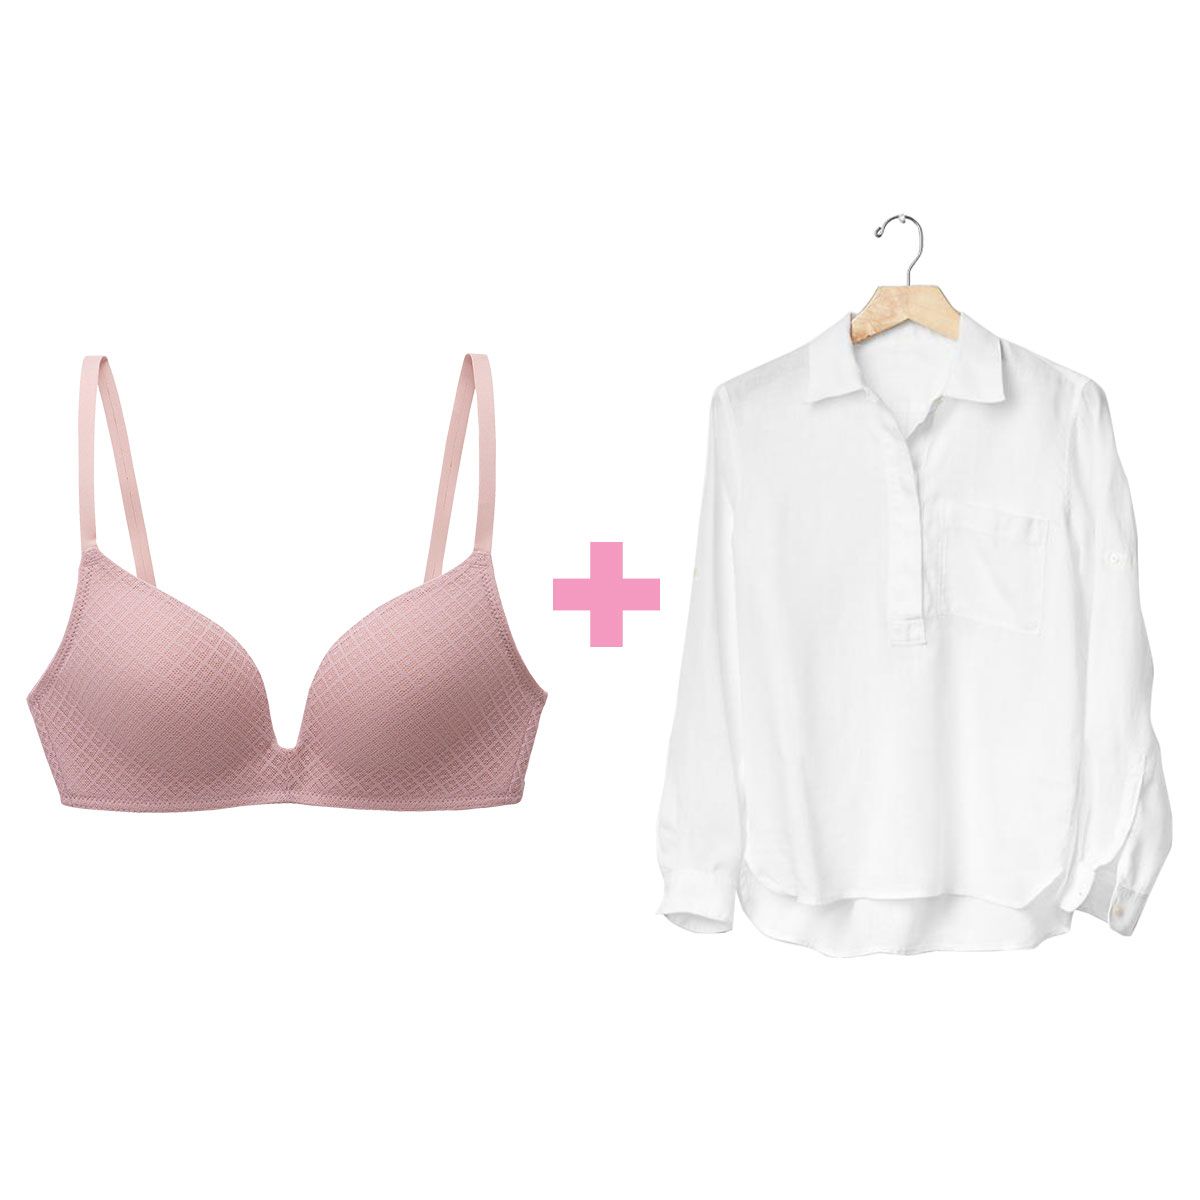 Underwear Guide: What Color Bra to Wear Under White Shirt? – Okay Trendy